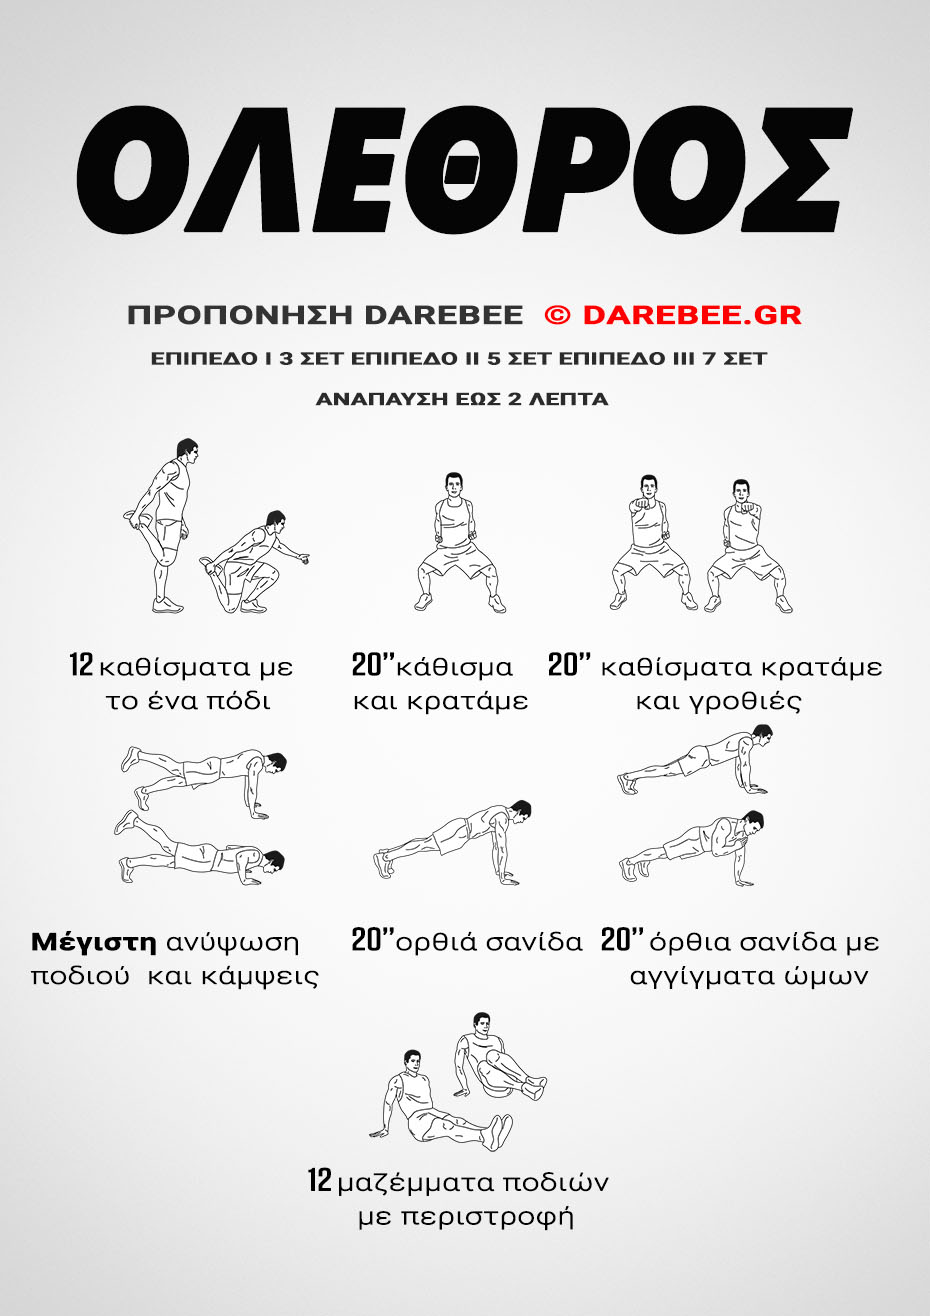 Bane couldn't be anything else other than a Darebee home-fitness, strength workout that's not suitable for beginners.